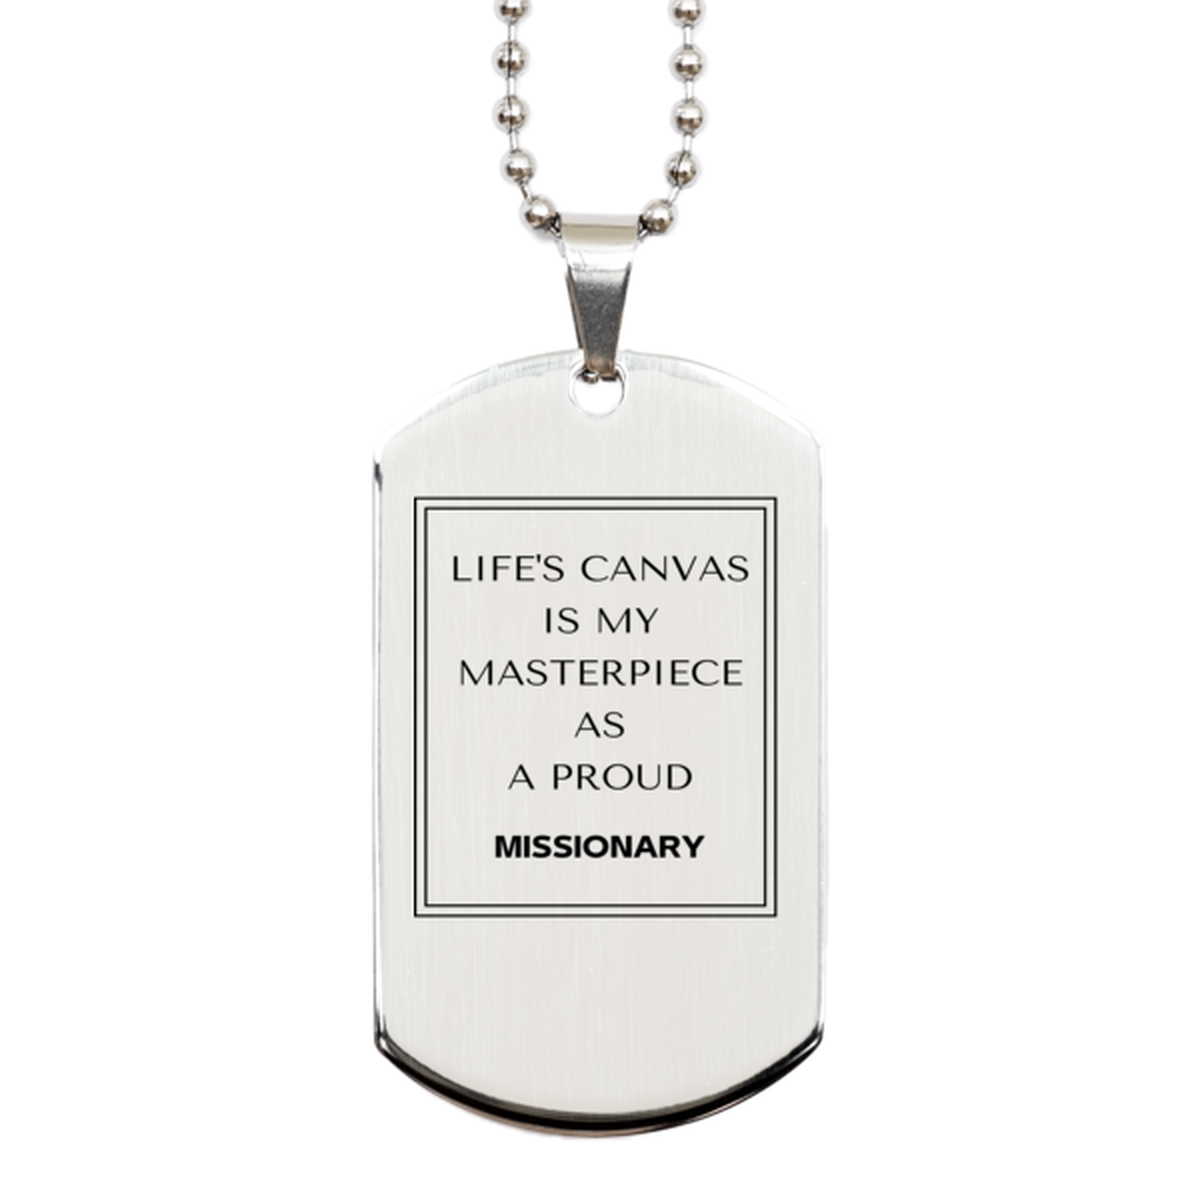 Proud Missionary Gifts, Life's canvas is my masterpiece, Epic Birthday Christmas Unique Silver Dog Tag For Missionary, Coworkers, Men, Women, Friends